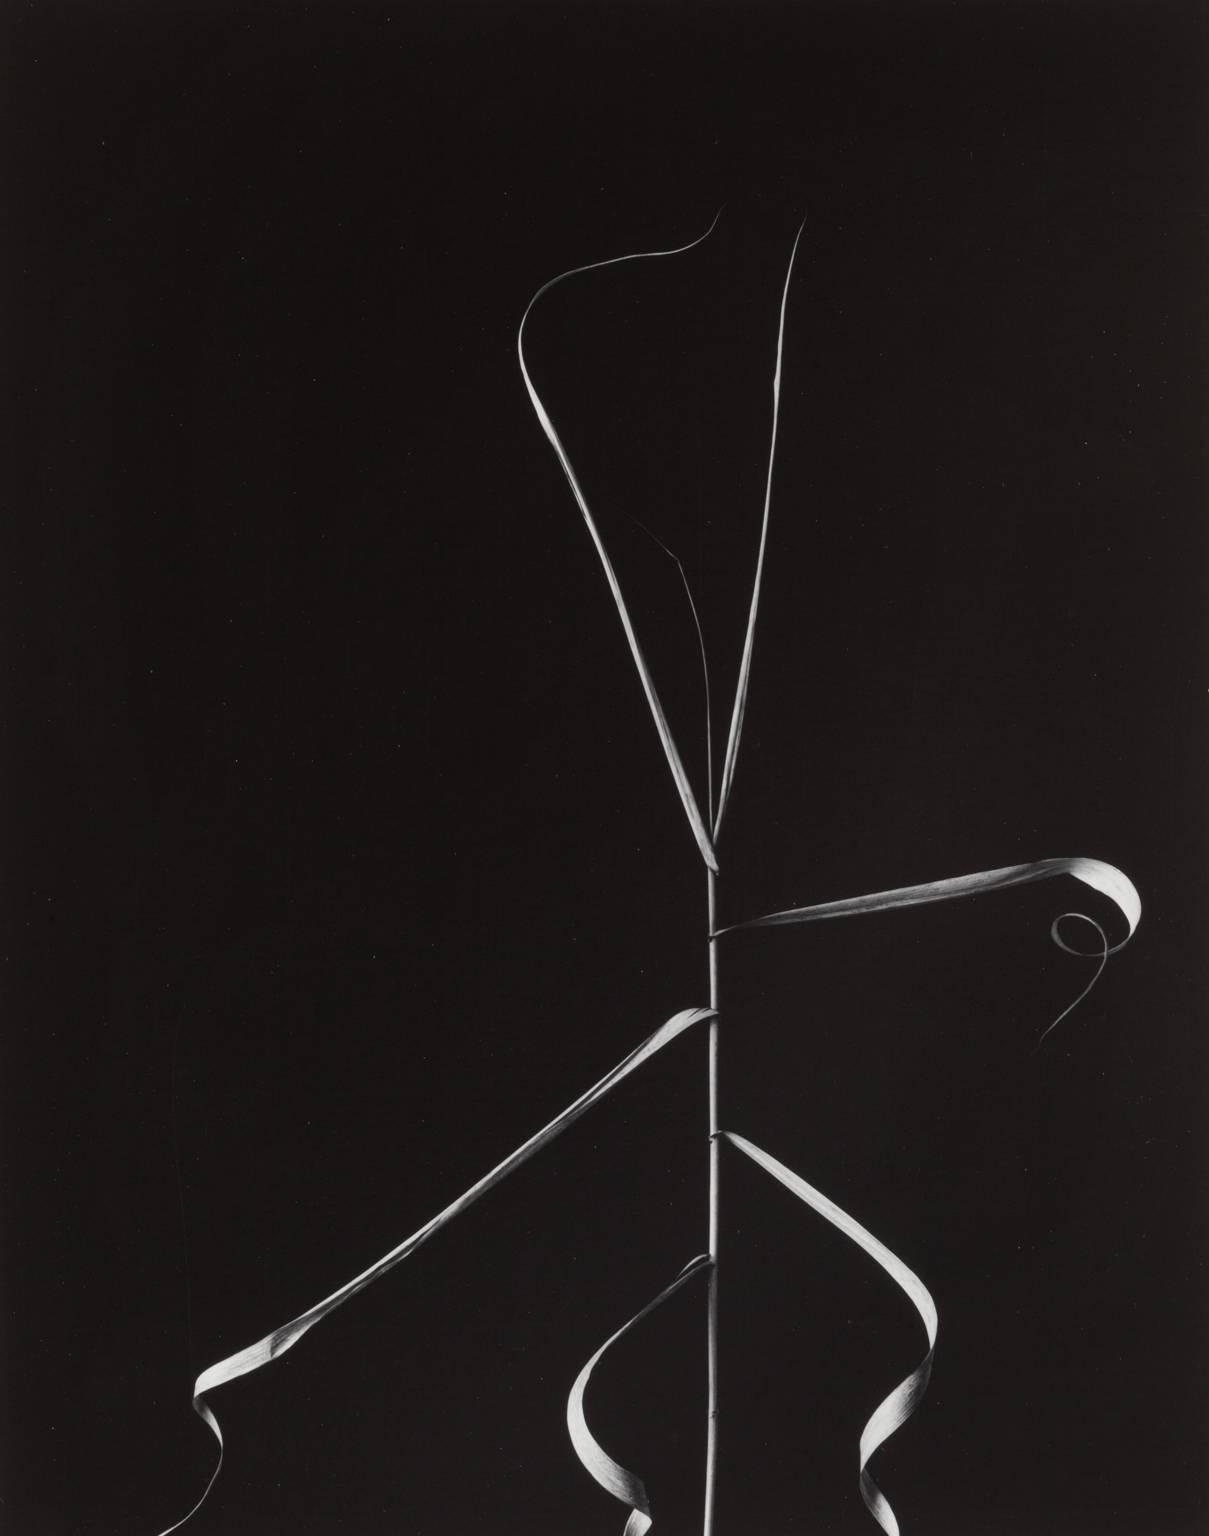 Harry Callahan Black and White Photograph - Weed, Aix-en-Provence